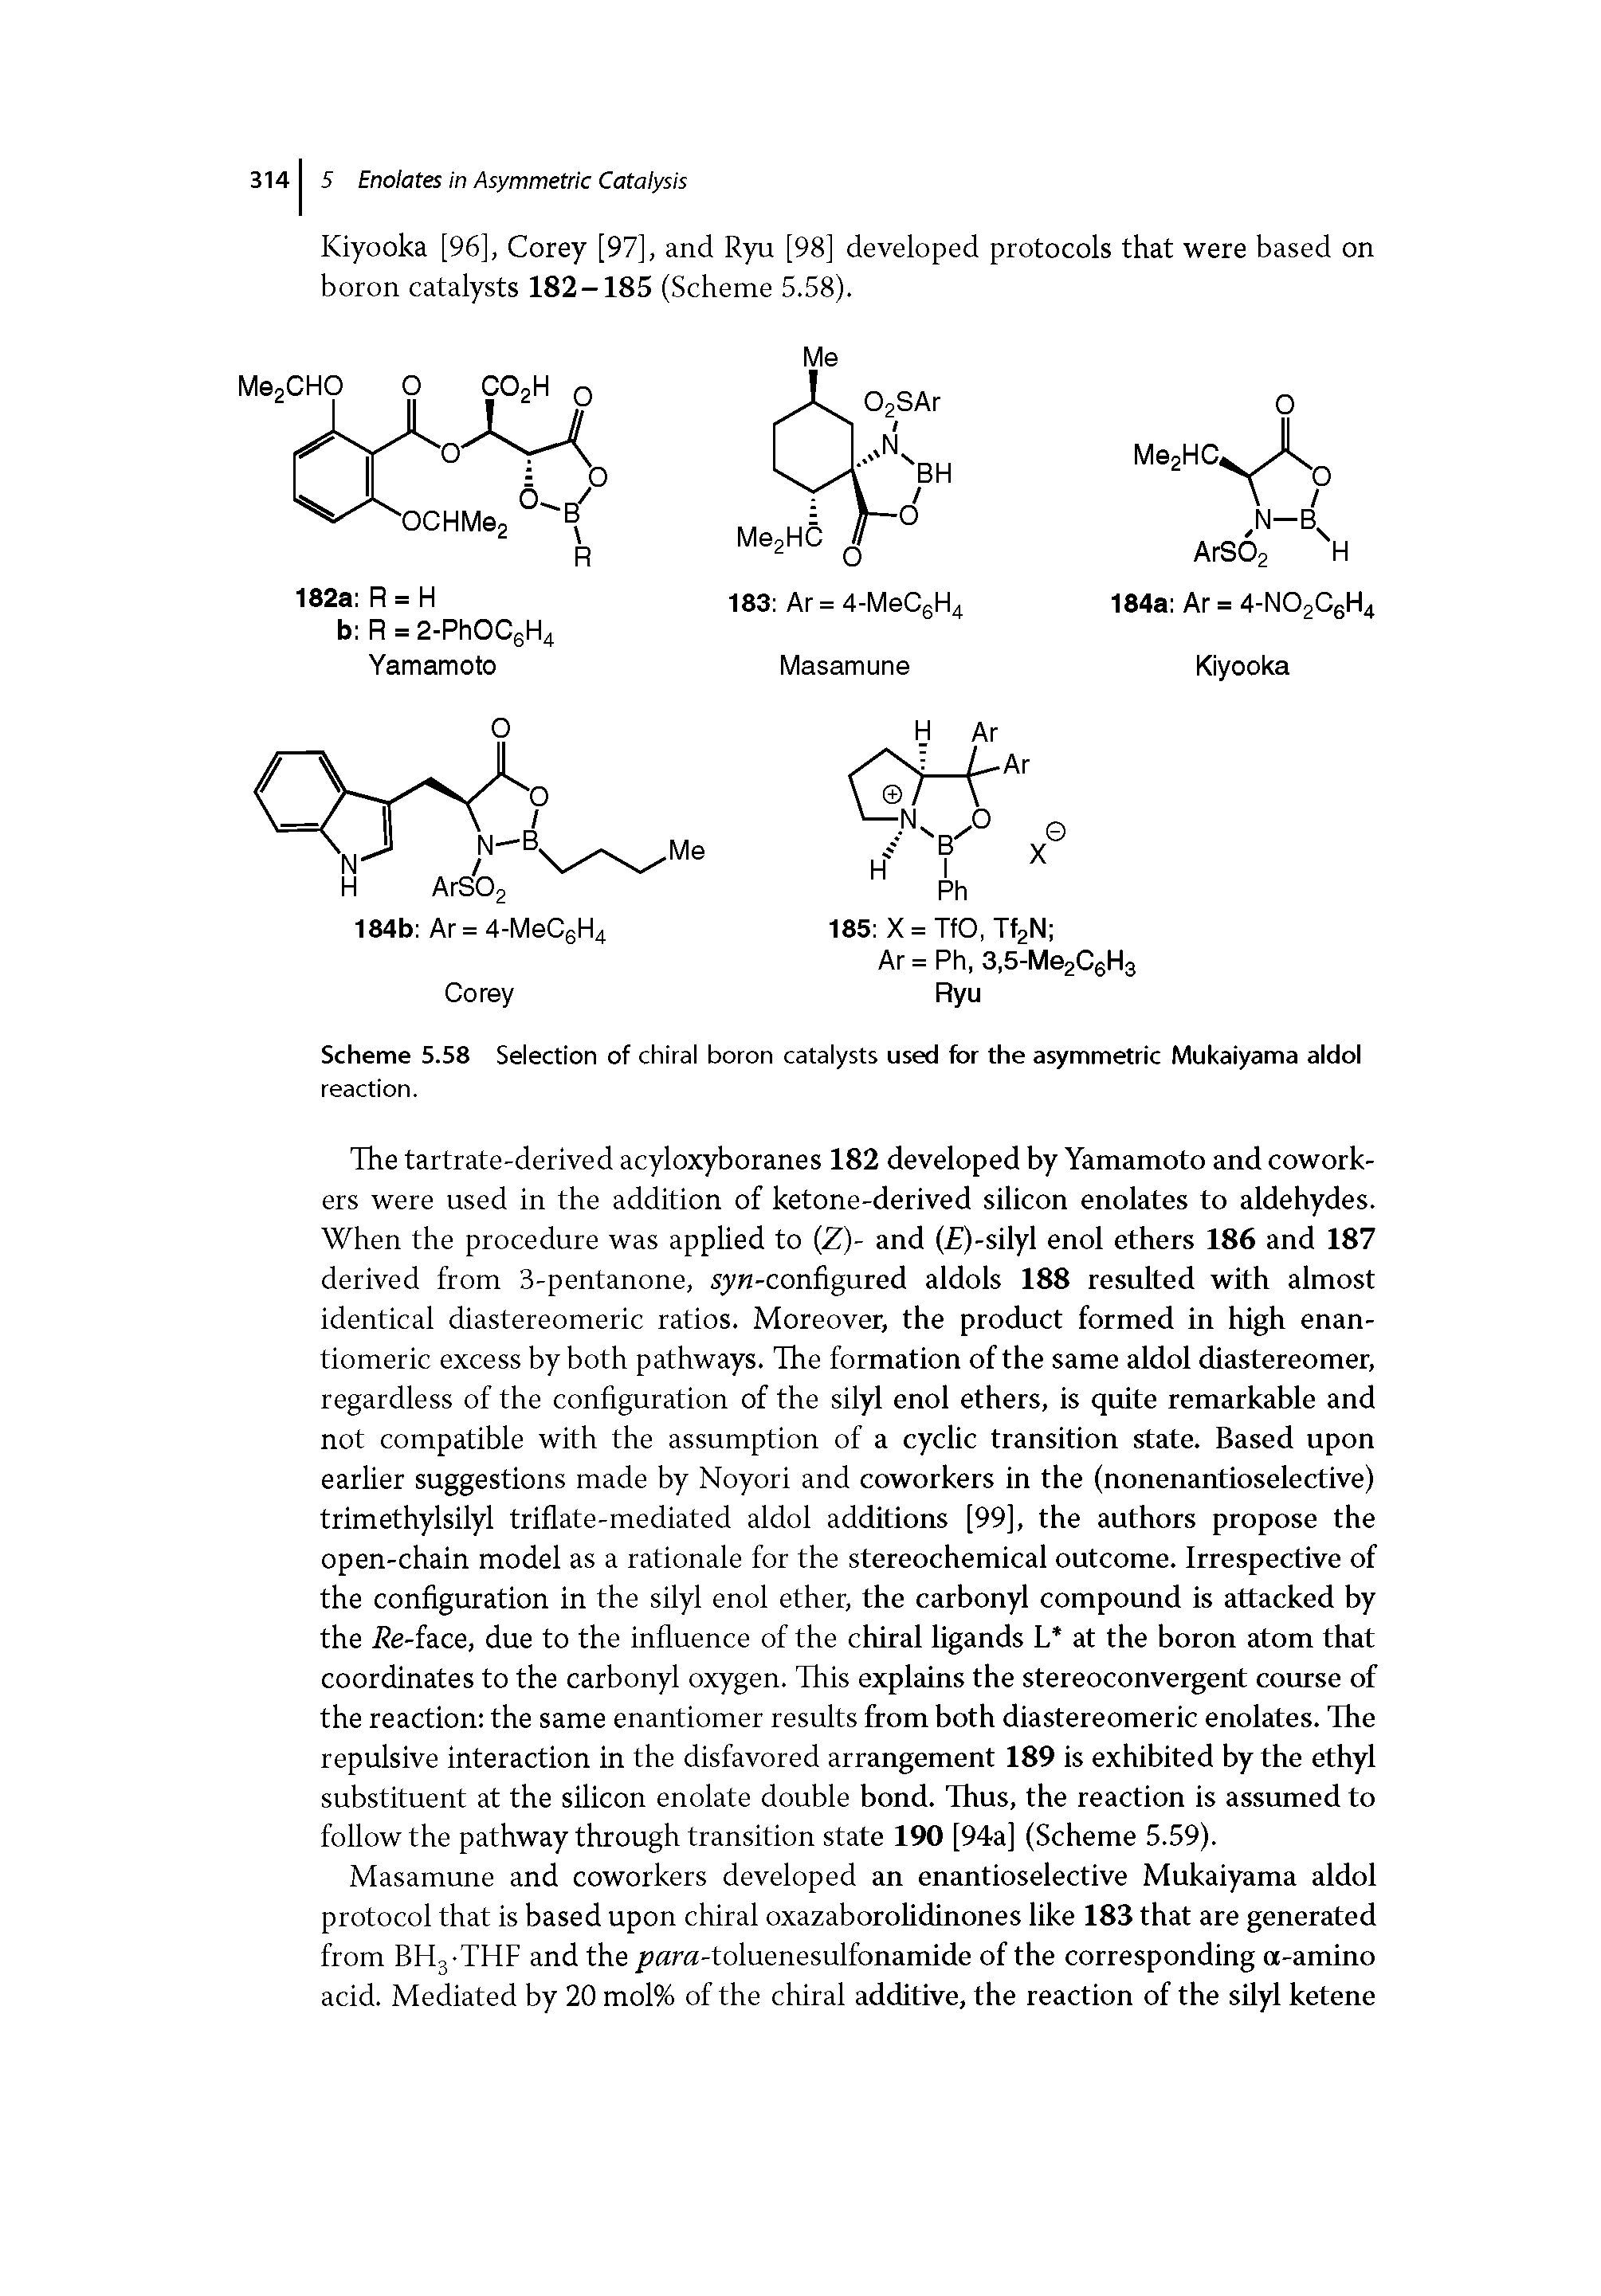 Scheme 5.58 Selection of chiral boron catalysts used for the asymmetric Mukaiyama aldol reaction.